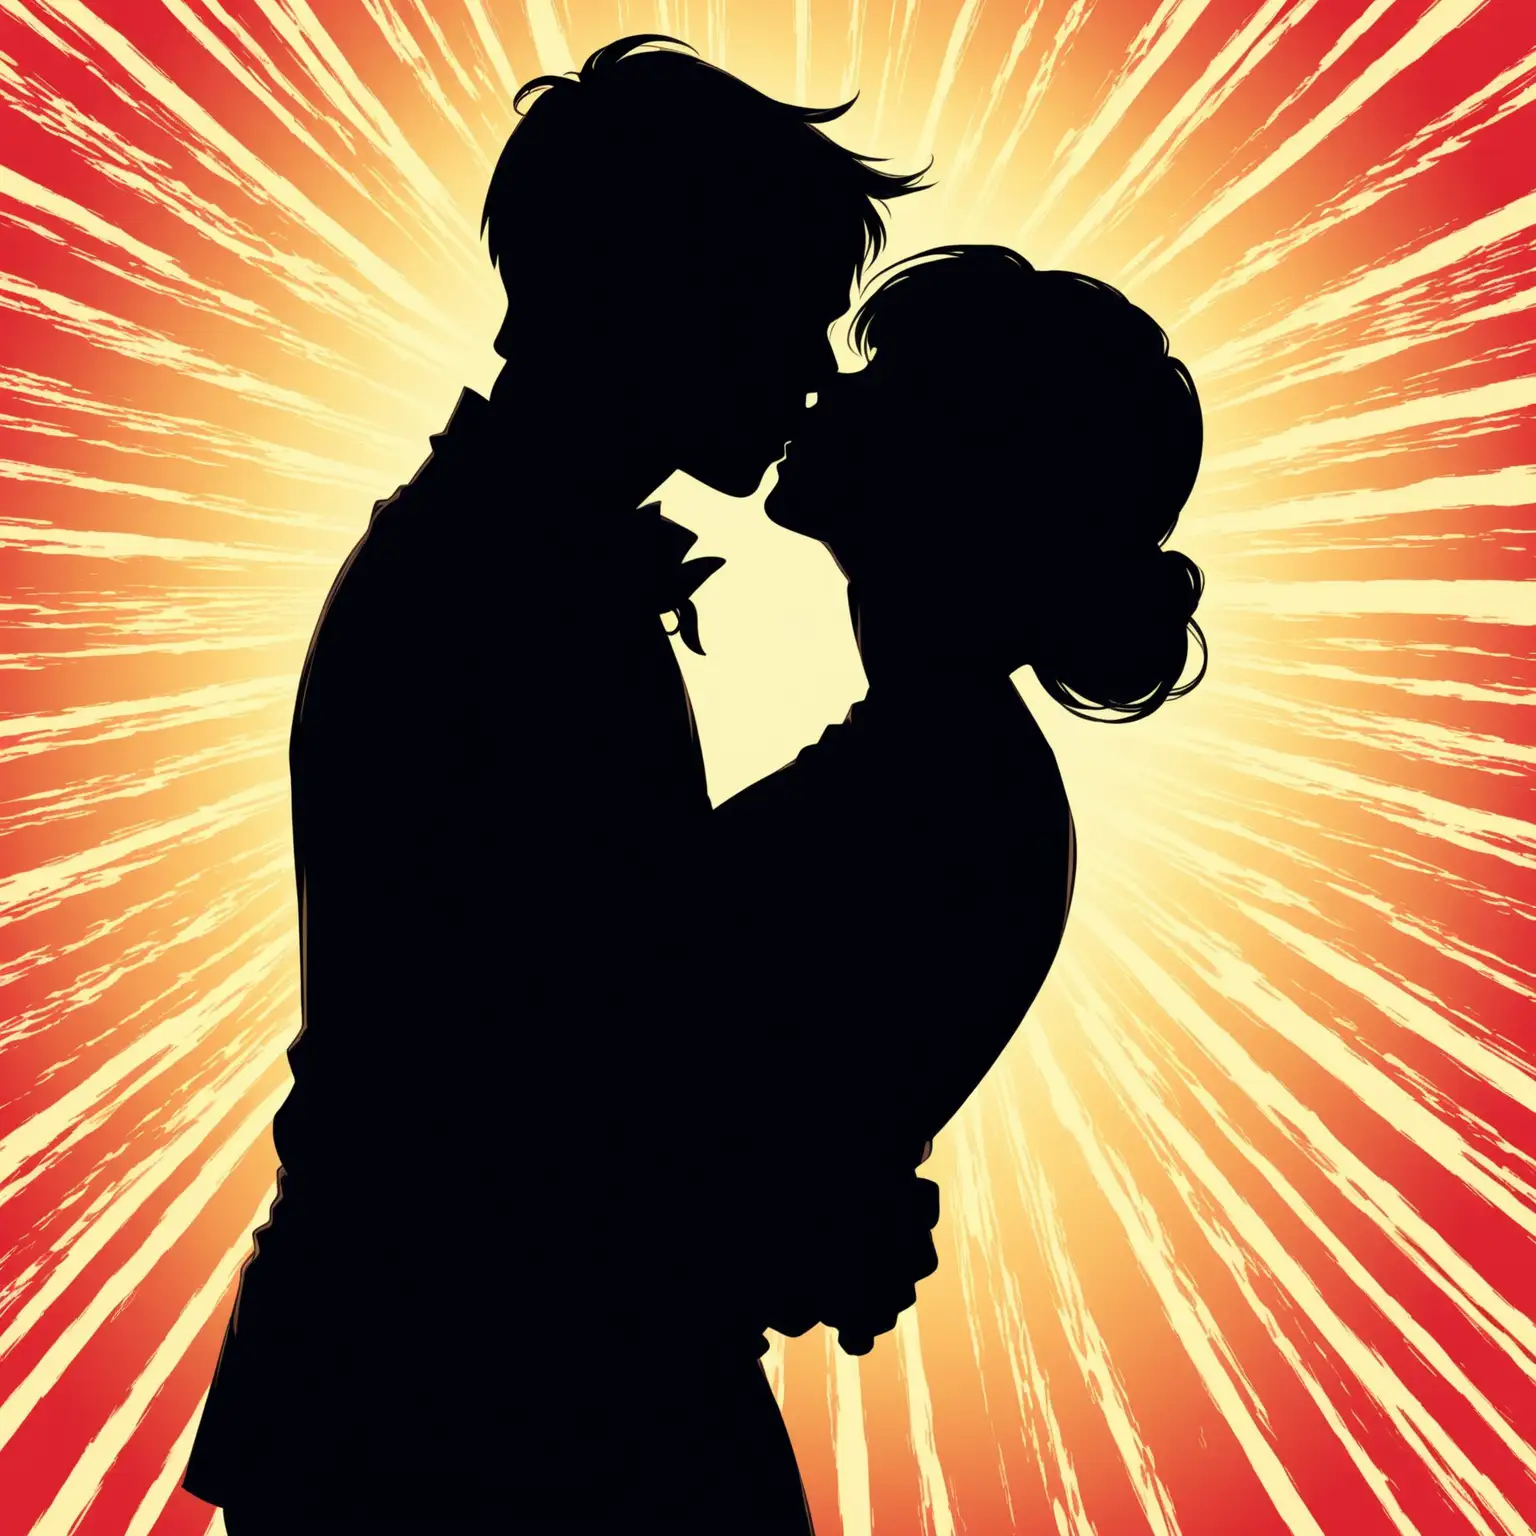 Comic book style: Silhoette of a man and woman kissing